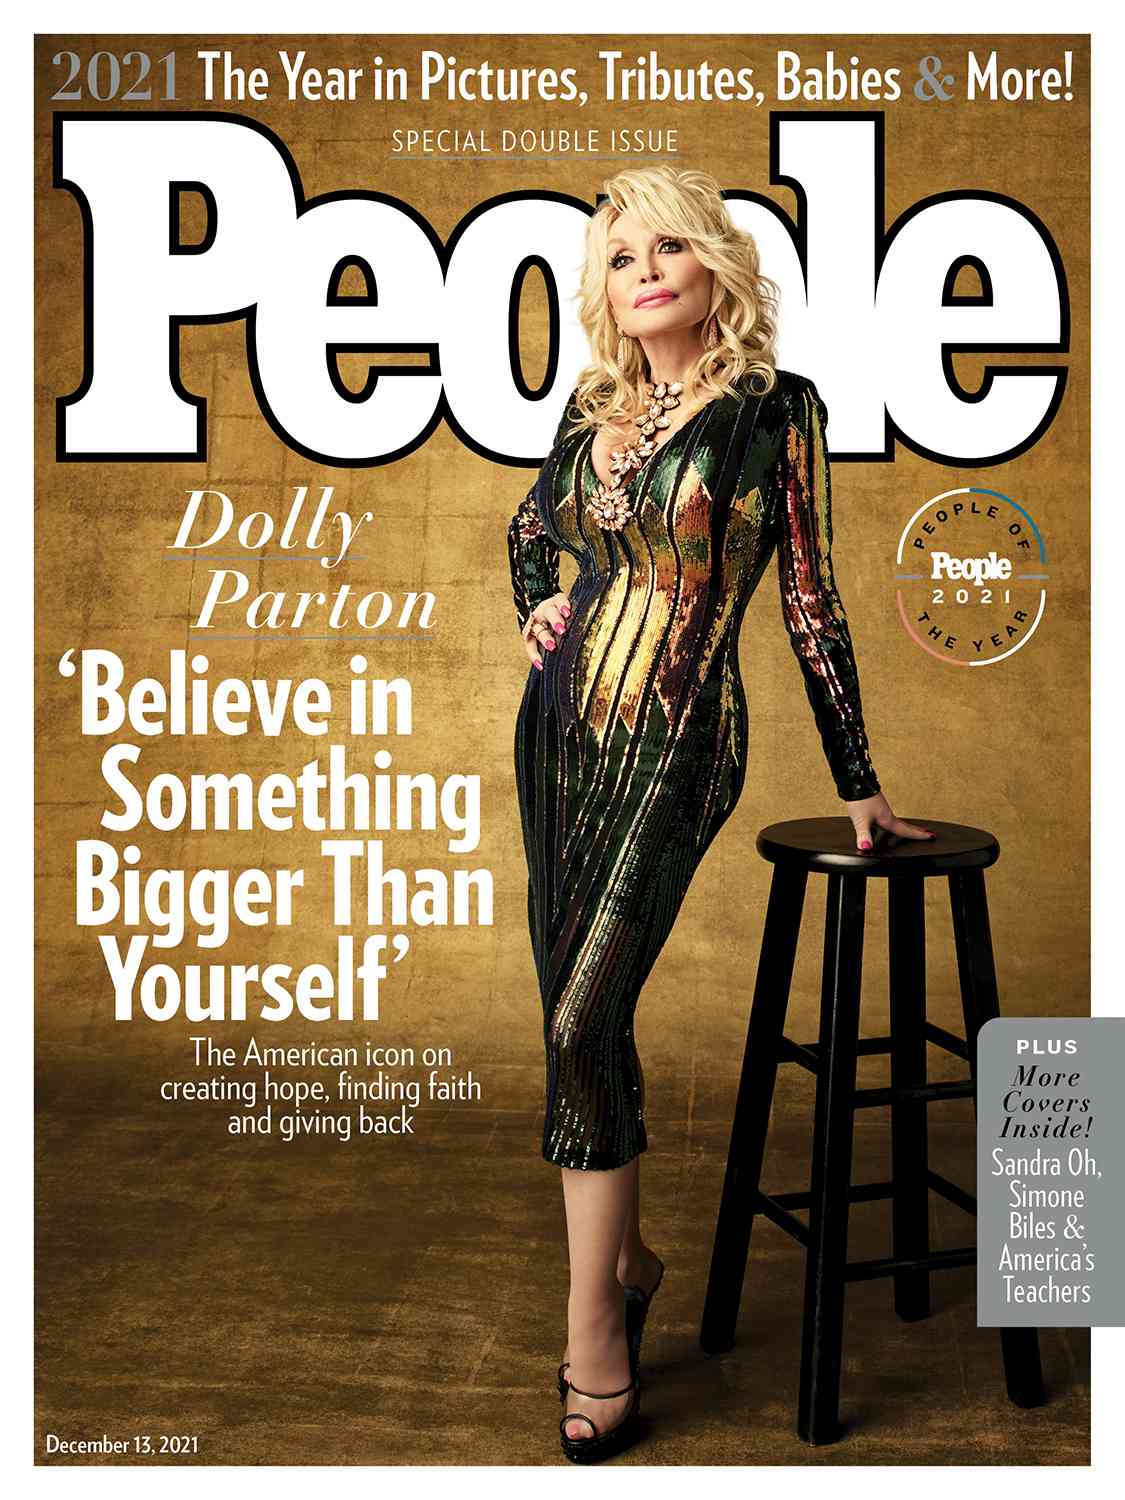 Dolly Parton - Page 10 Image?url=https%3A%2F%2Fstatic.onecms.io%2Fwp-content%2Fuploads%2Fsites%2F20%2F2021%2F11%2F30%2Fdolly-cover